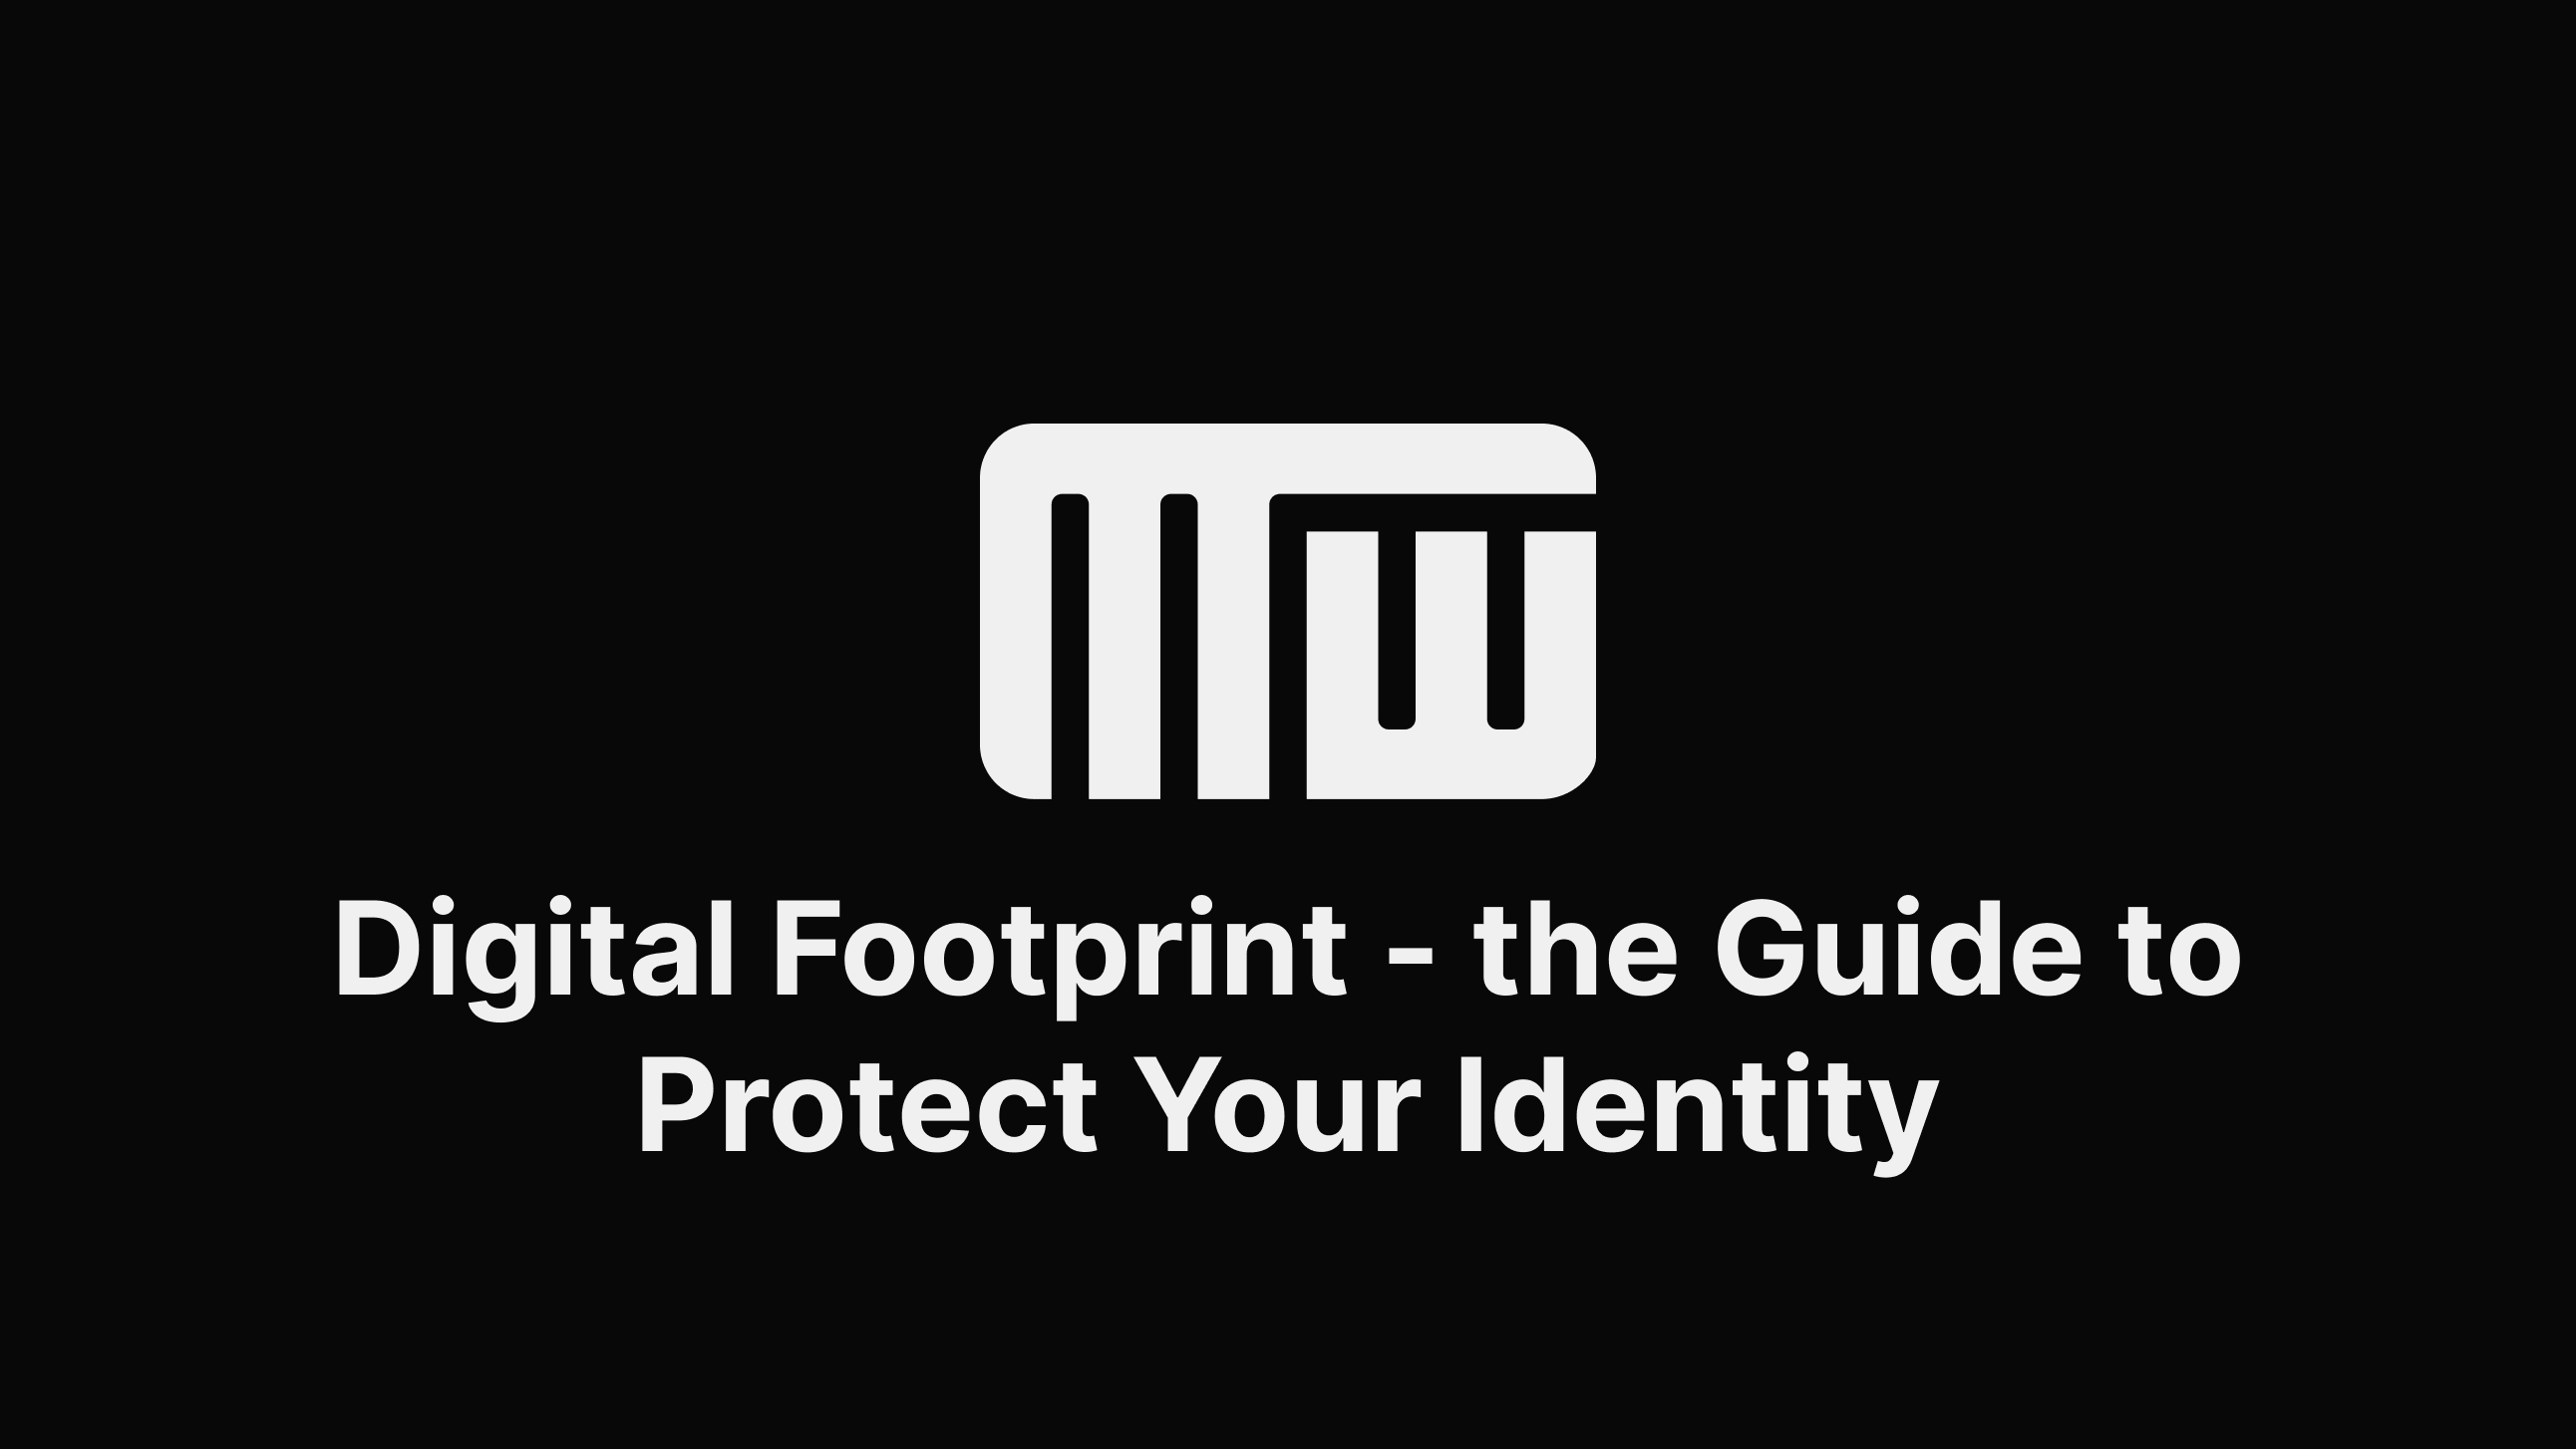 Digital Footprint - the Ultimate Guide to Protect Your Identity